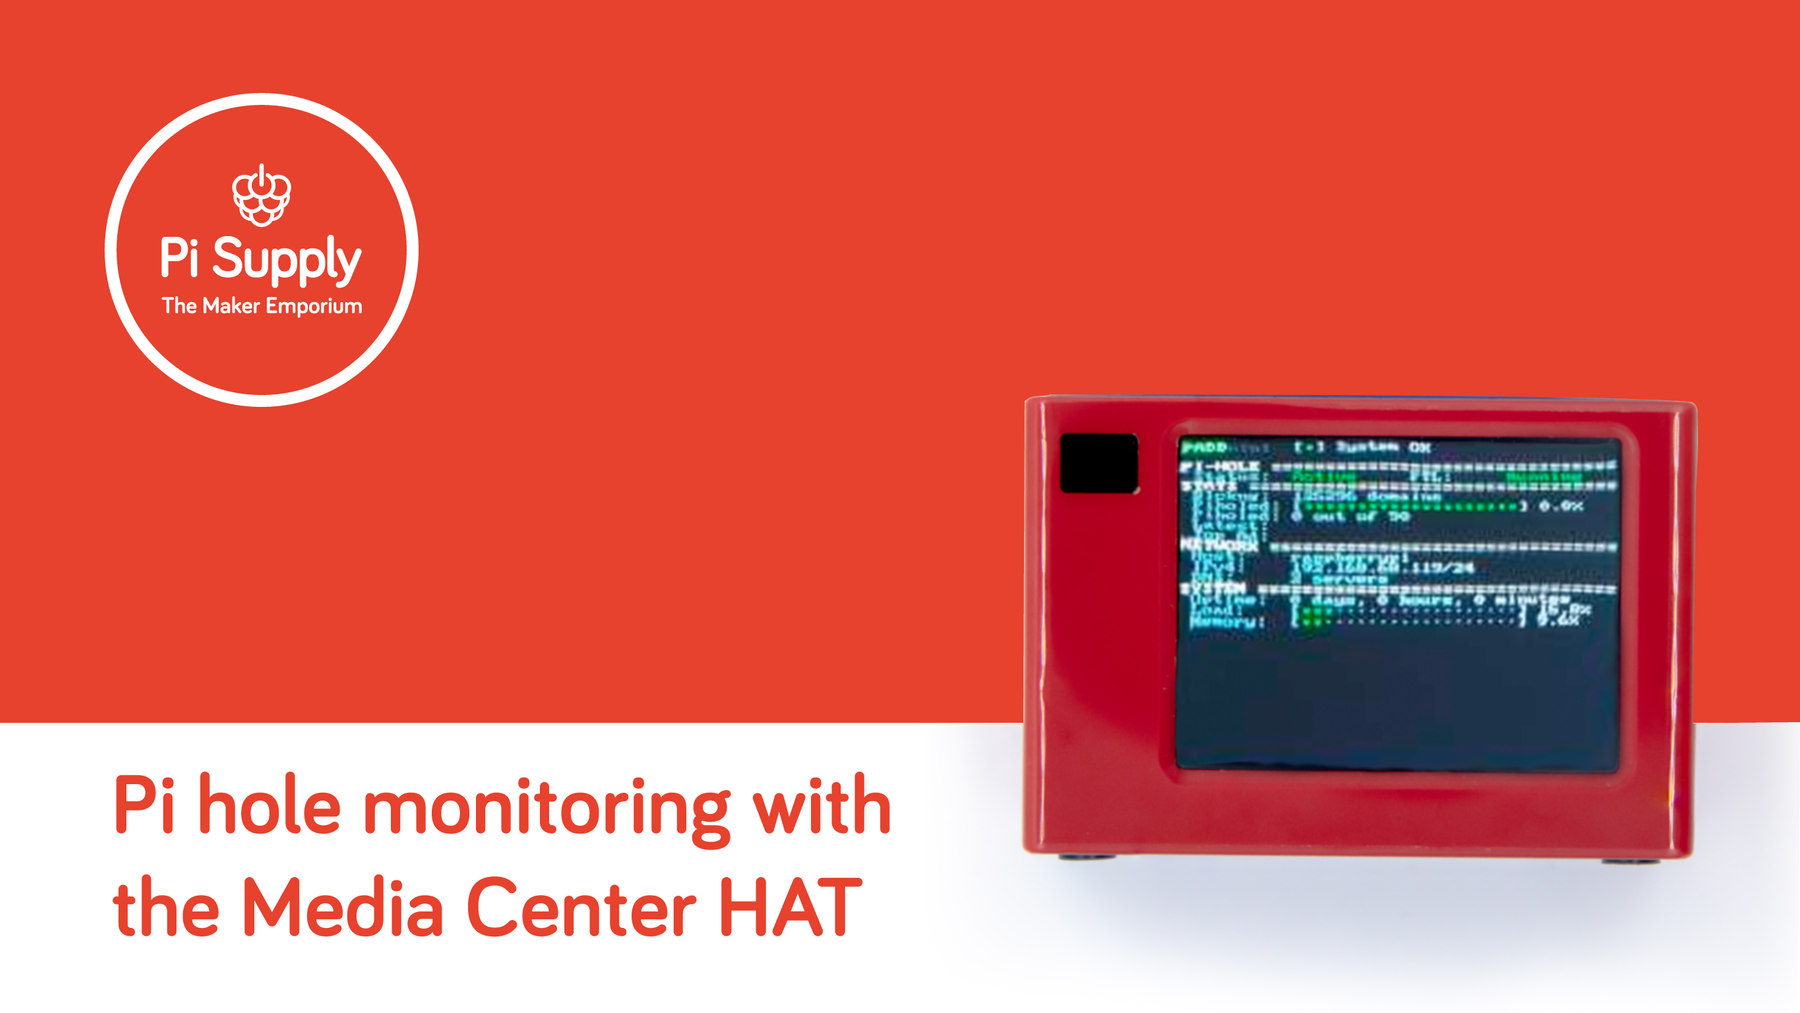 Pi hole monitoring with the Media Center HAT